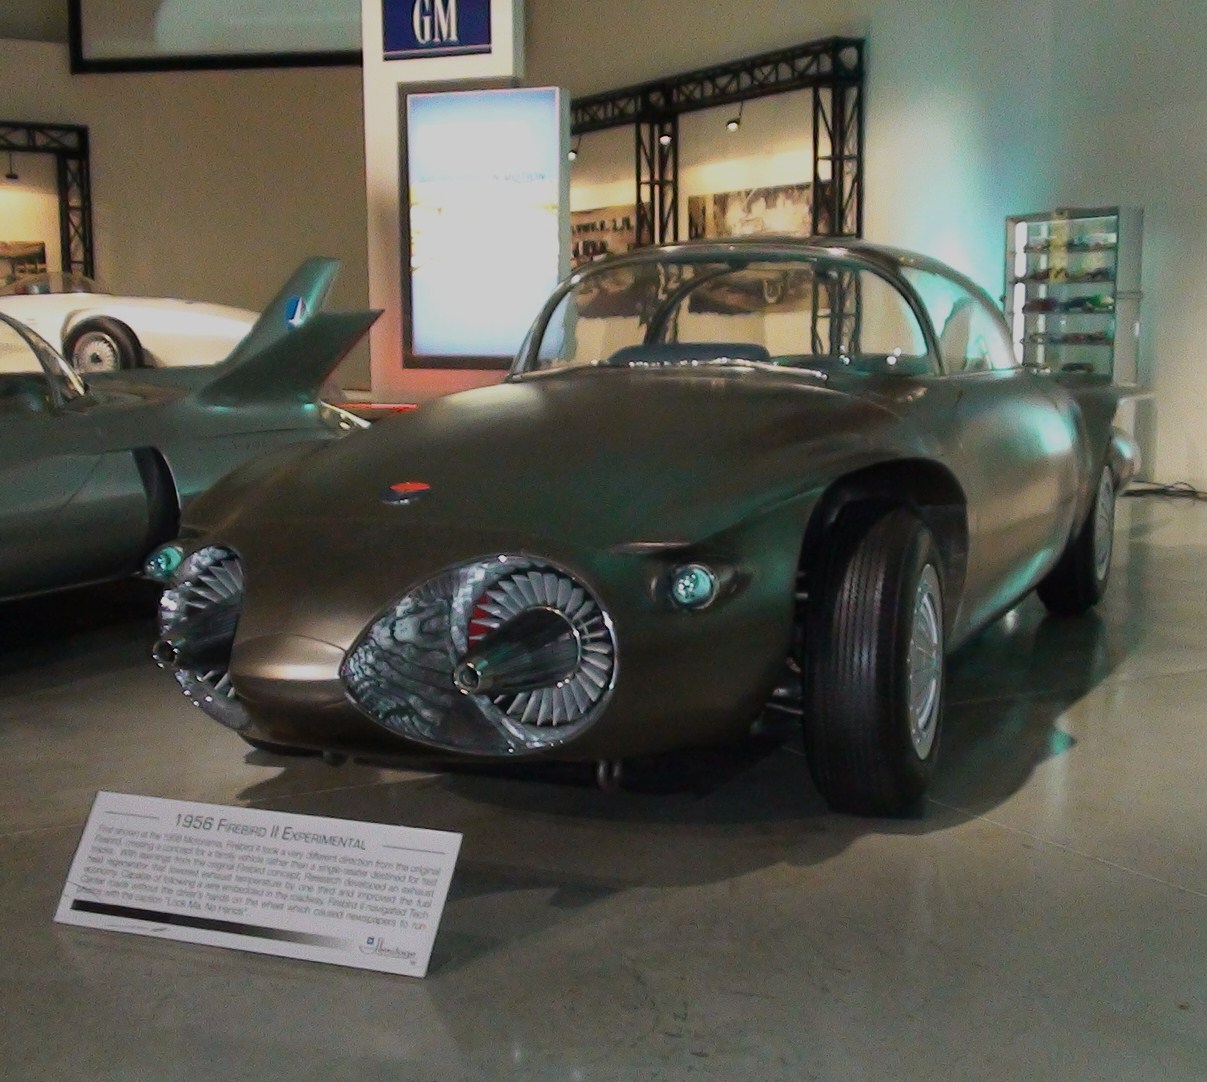 cars and autos on display in a museum